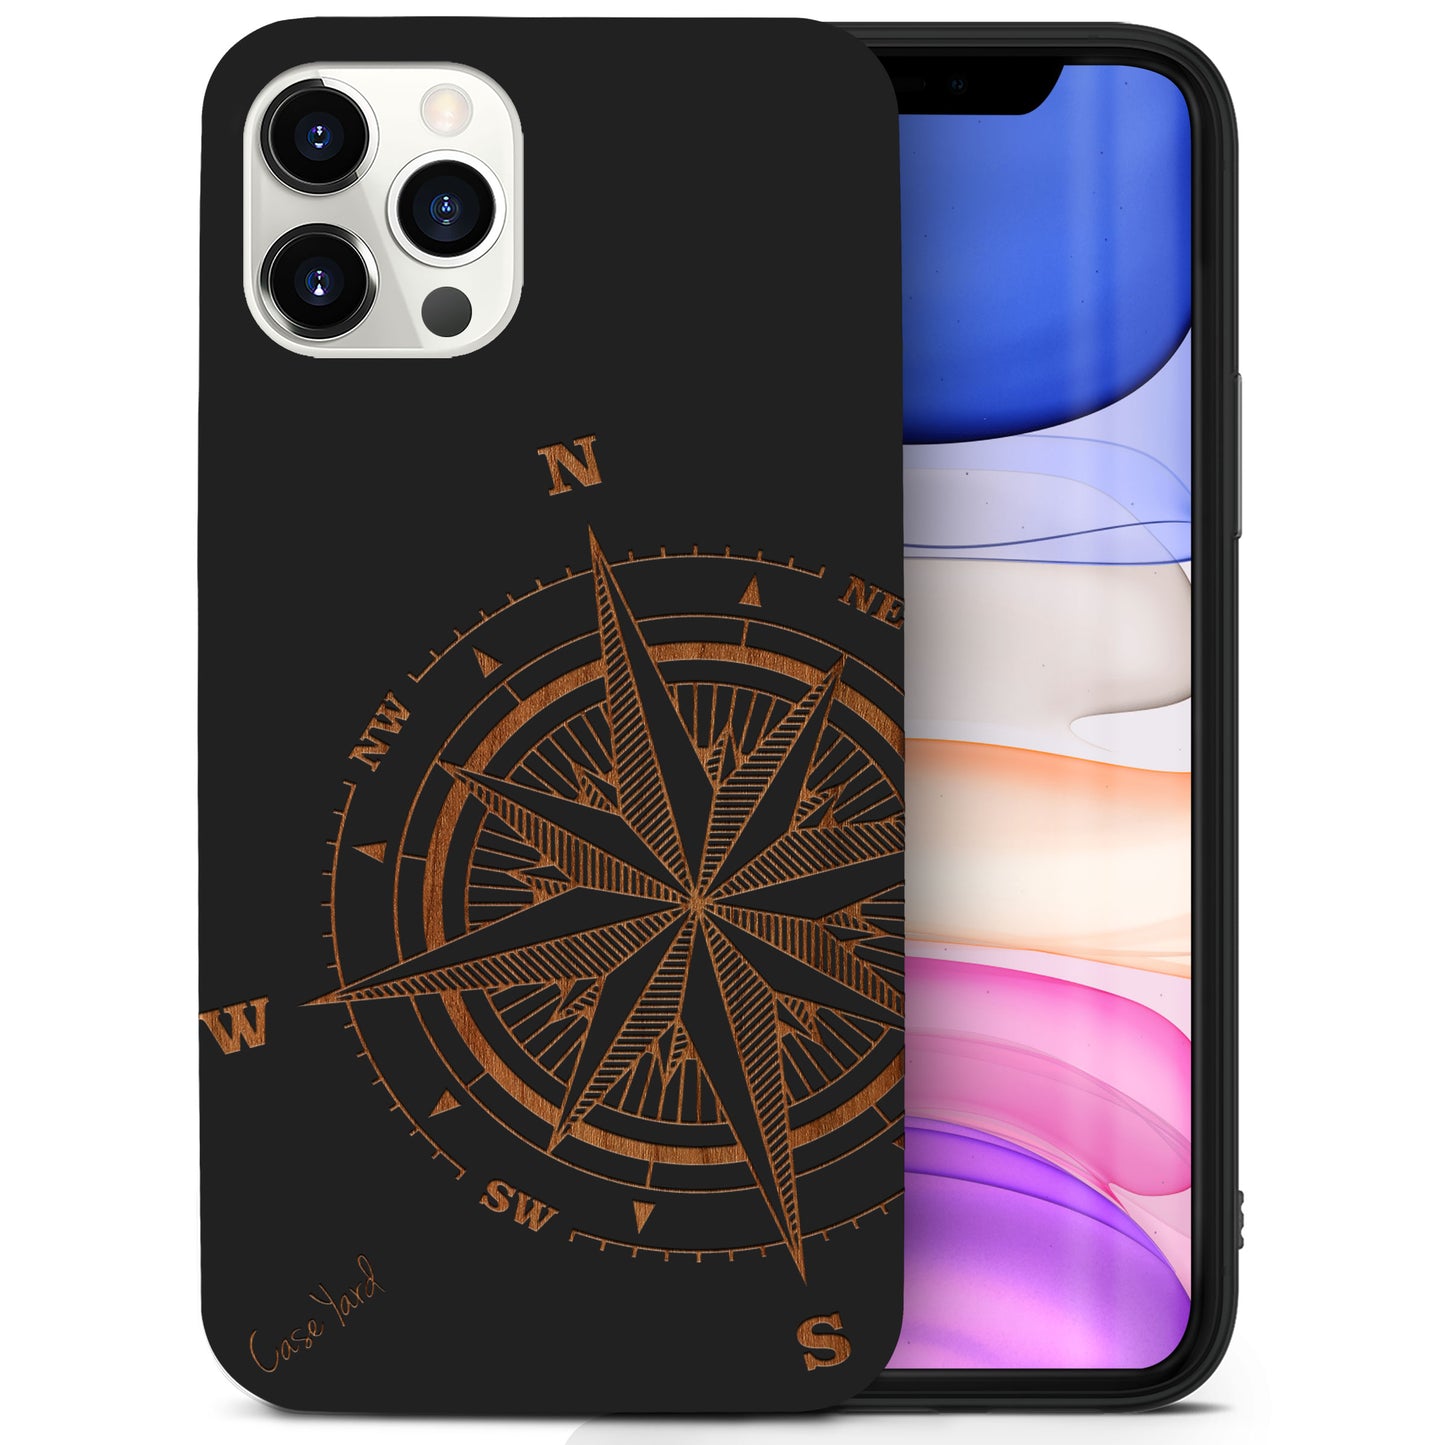 Wooden Cell Phone Case Cover, Laser Engraved case for iPhone & Samsung phone Compass Rose Wood Case Design